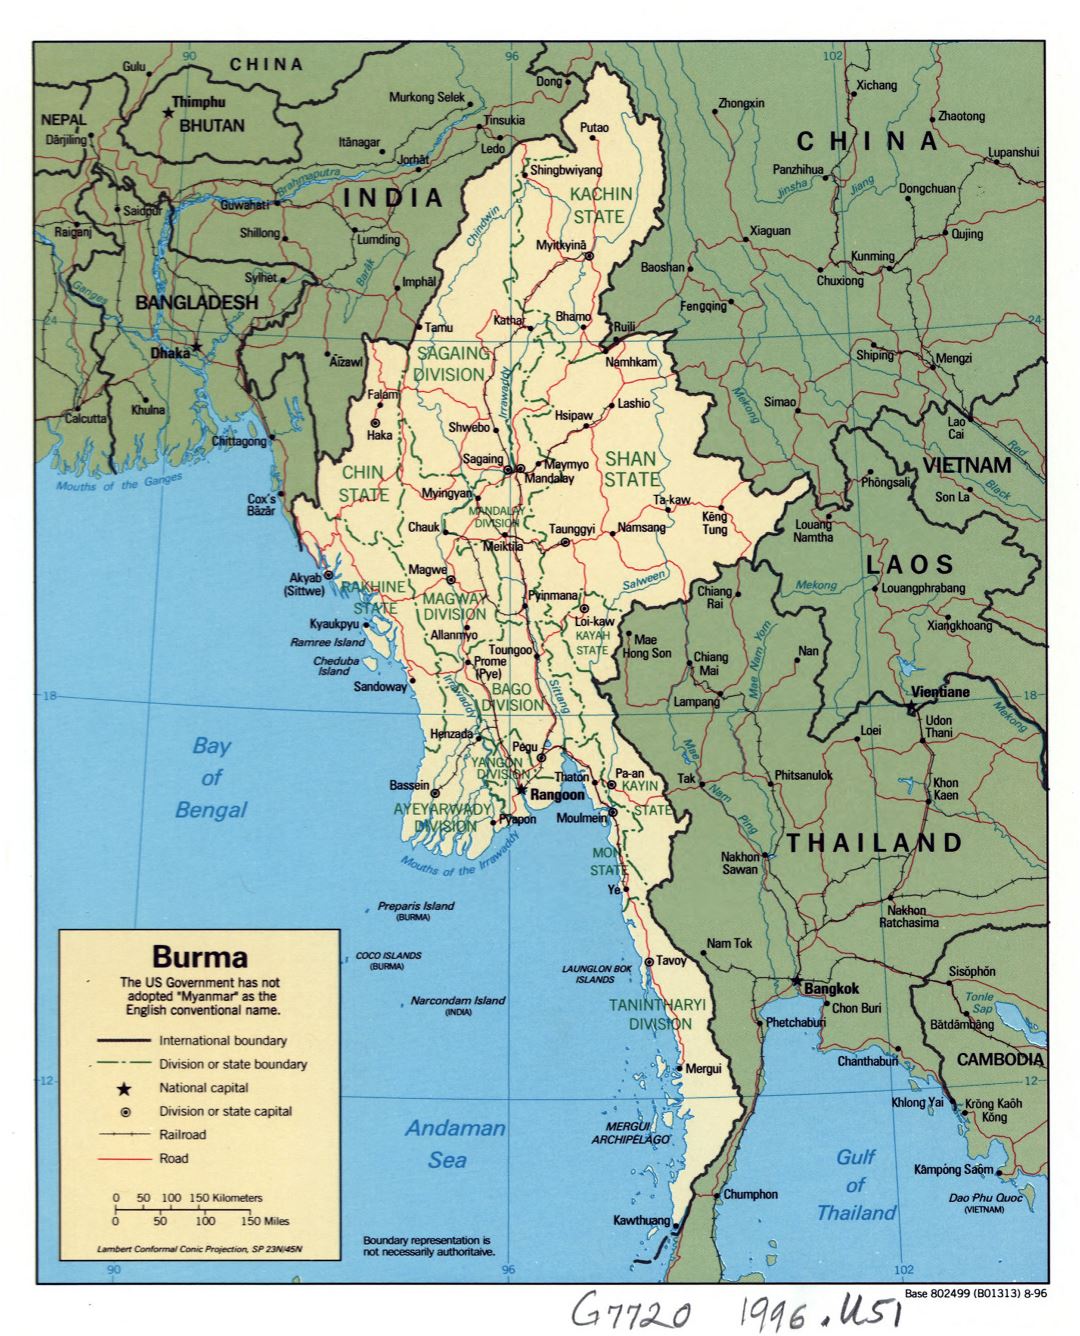 Large Detailed Political And Administrative Map Of Burma (myanmar) With Roads Railroads And Major Cities 1996 Small 